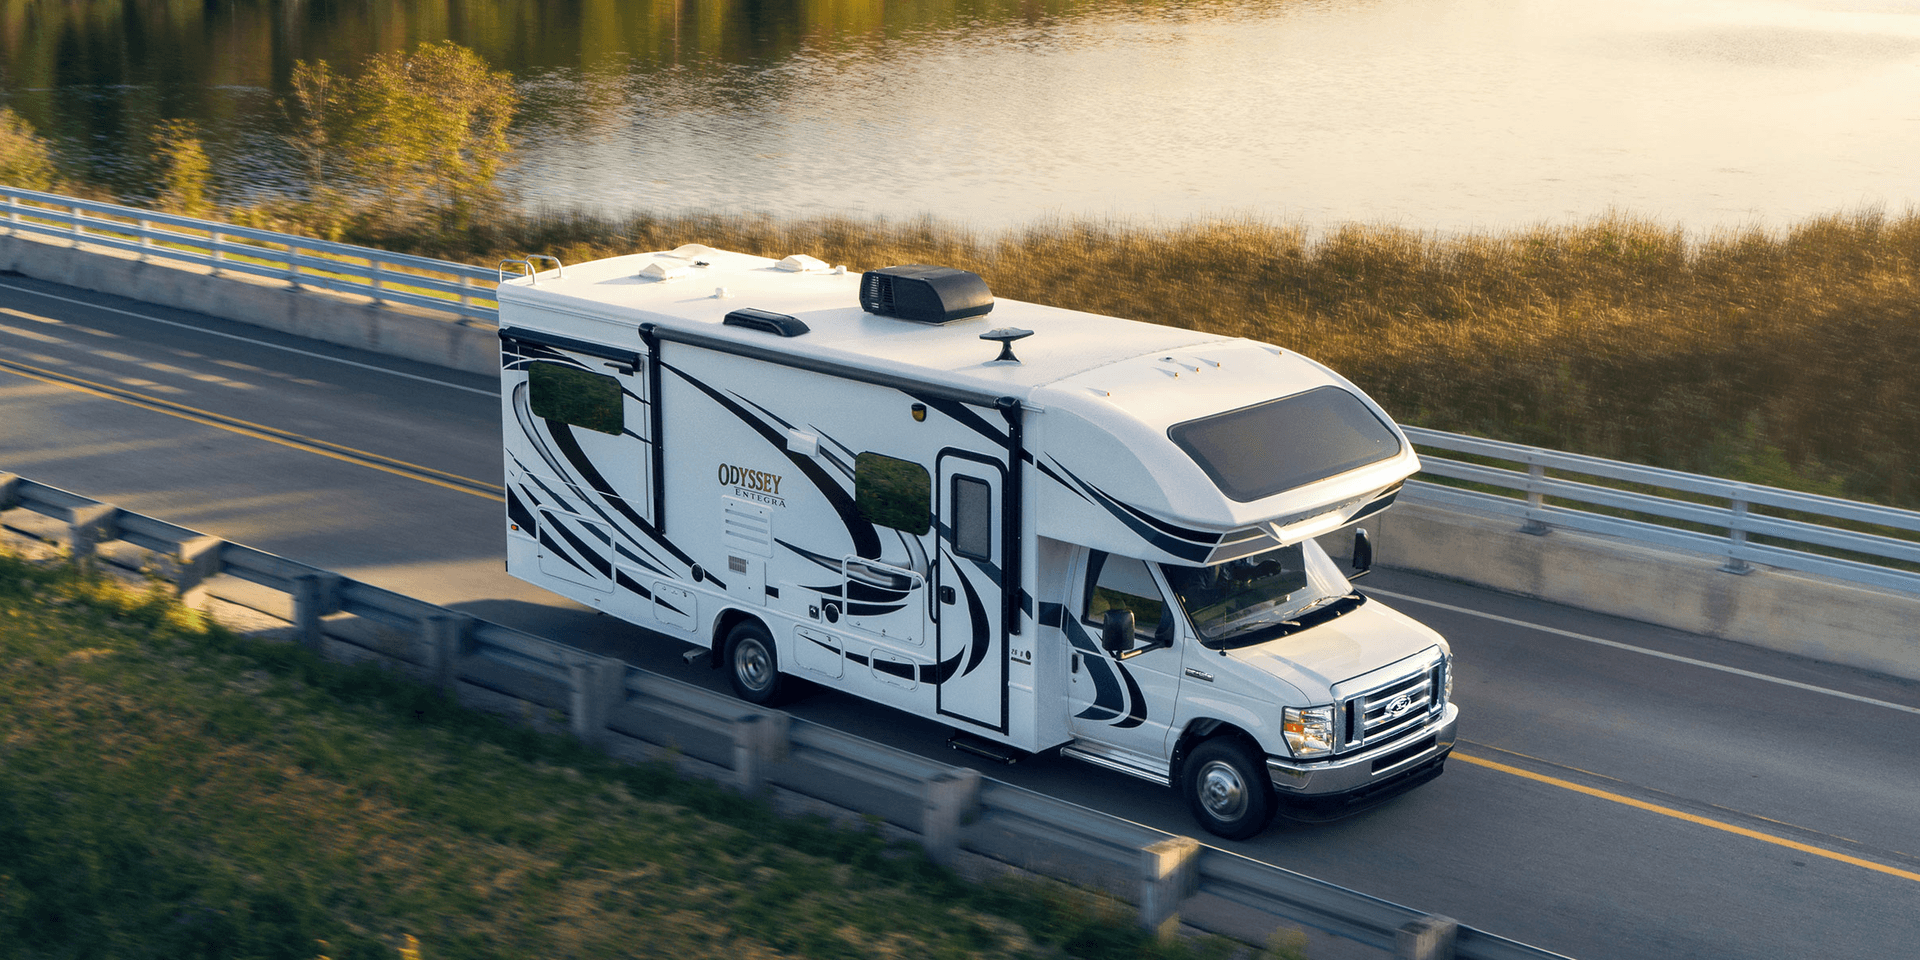 A Class C motorhome is driving past a body of water.